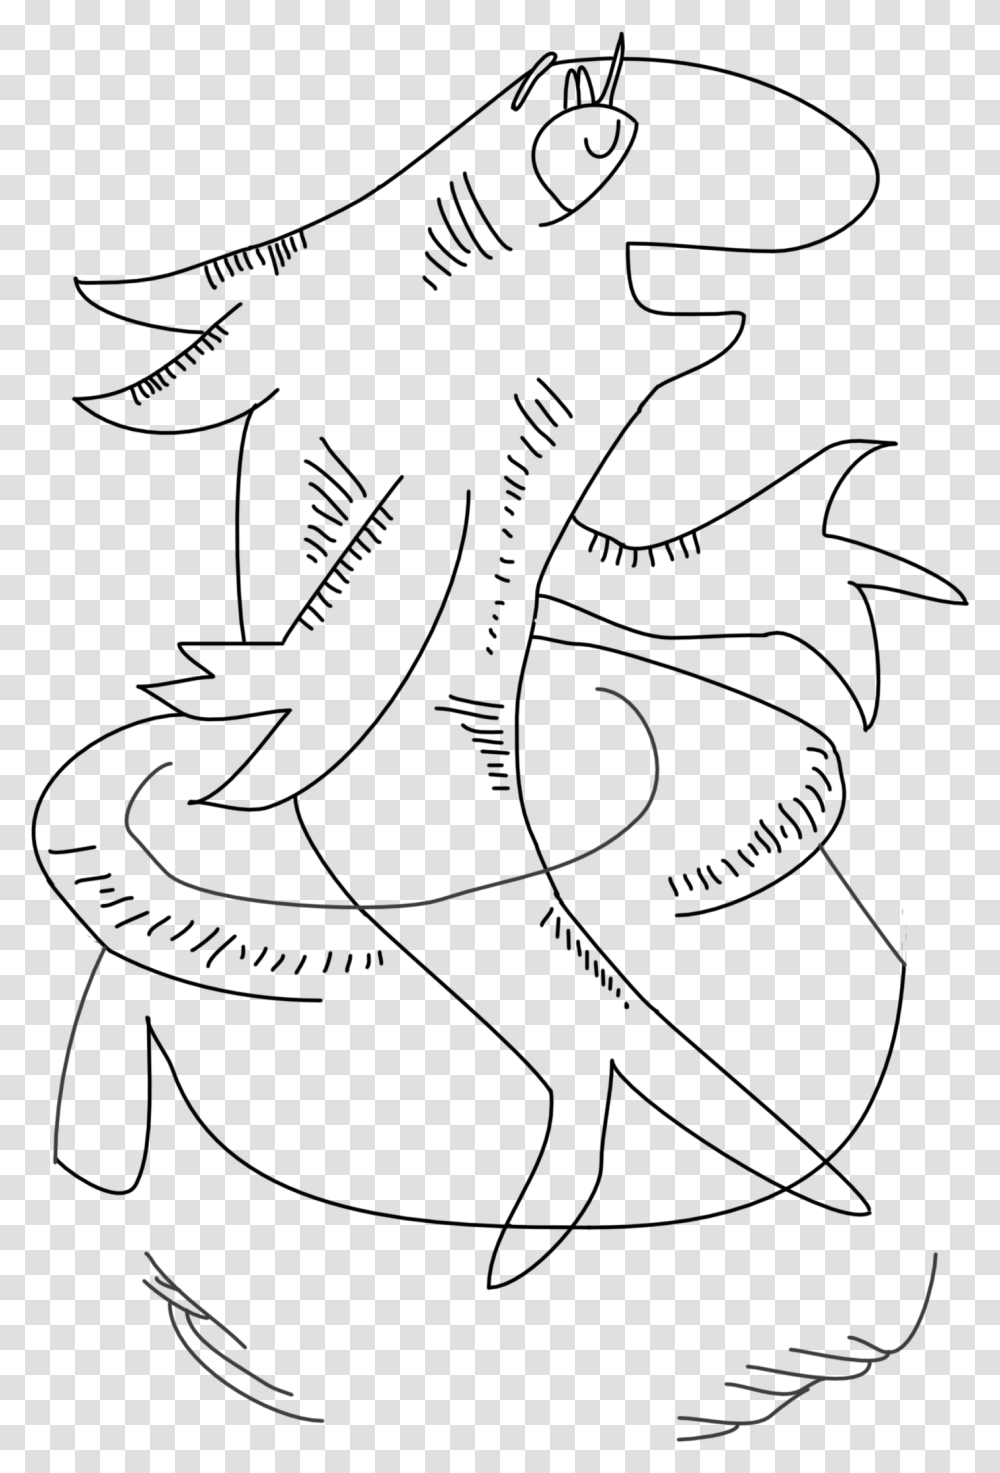 Dr Seuss Cat In The Hat Fish Drawing Outline By Workfromhomegal The Cat In The Hat, Alphabet, Silhouette, Handwriting Transparent Png